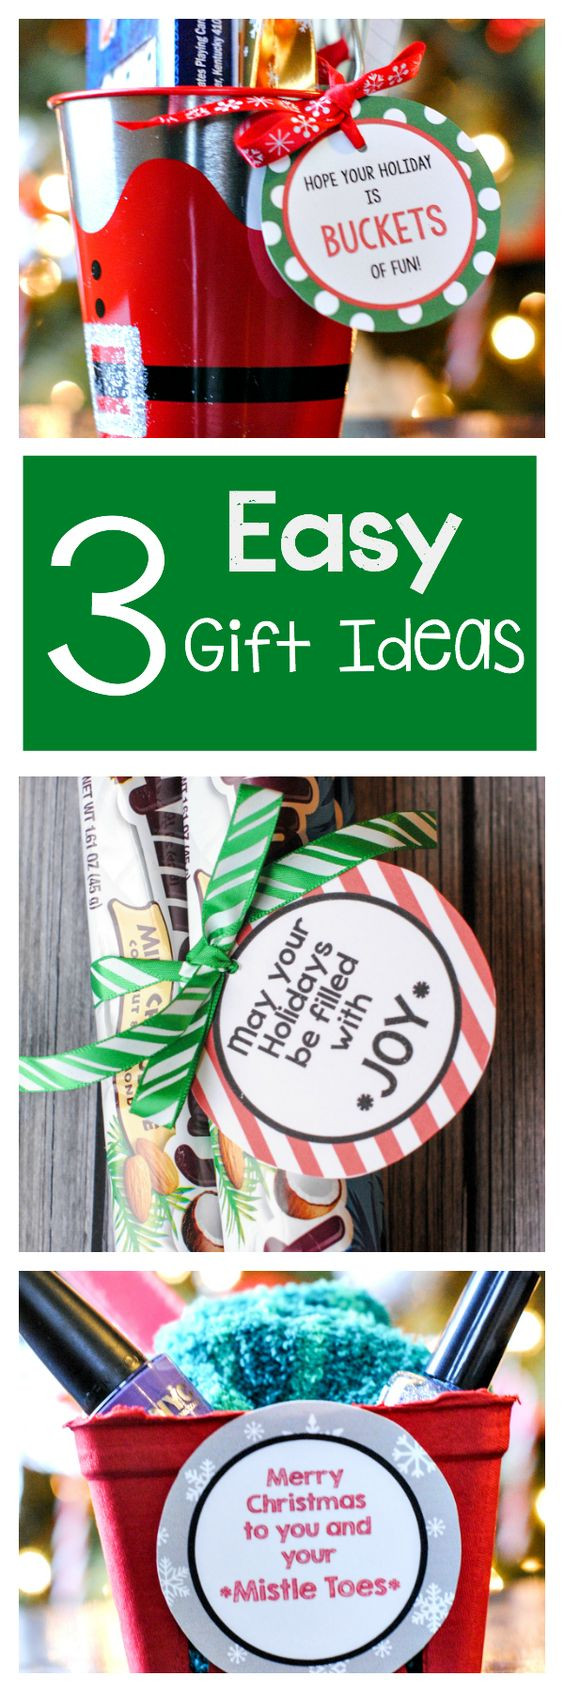 Holiday Gift Card Ideas
 The BEST FREE Christmas Printables – Gift Tags Holiday